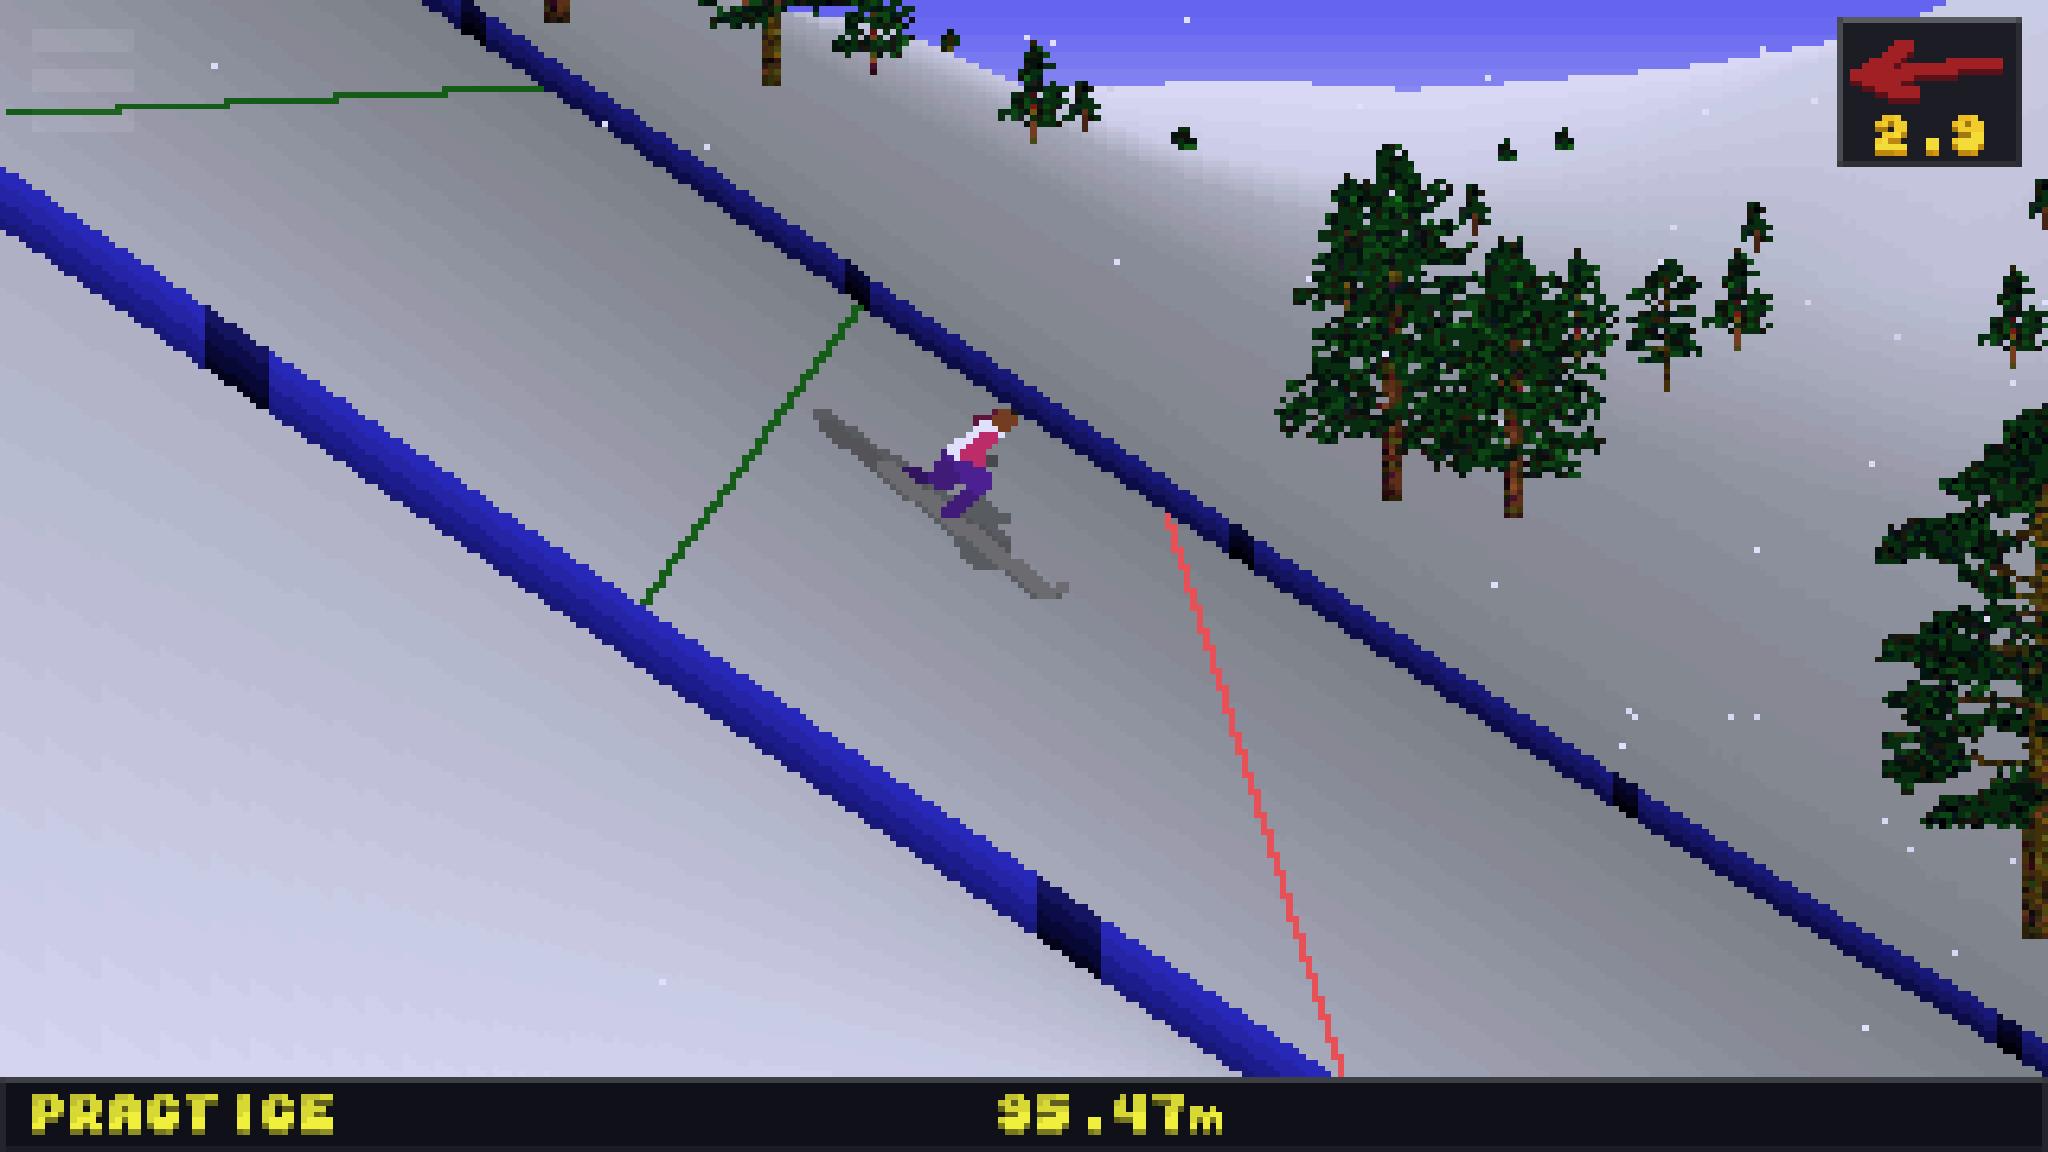 Deluxe Ski Jump 2 for Android - APK Download